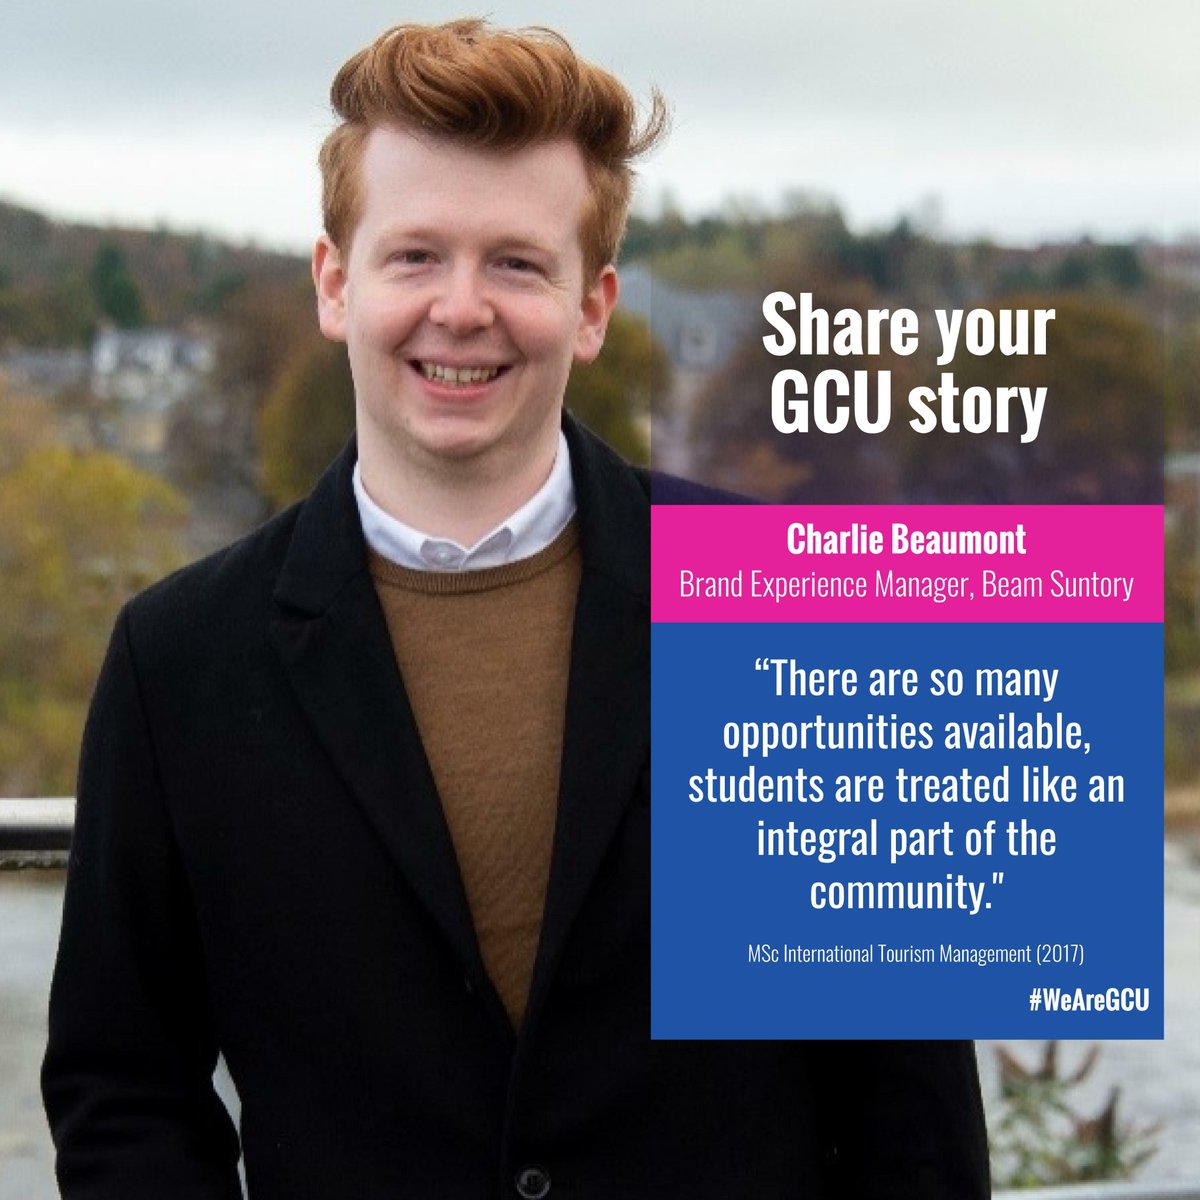 #GCUAlumni Charlie Beaumont turned his passion into a career as Brand Experience Manager for global spirits company Beam Suntory.

“GCU had a great business-minded outlook, allowing us to network and gain invaluable industry experience.” 

#WeAreGCU #ShareYourGCUStory